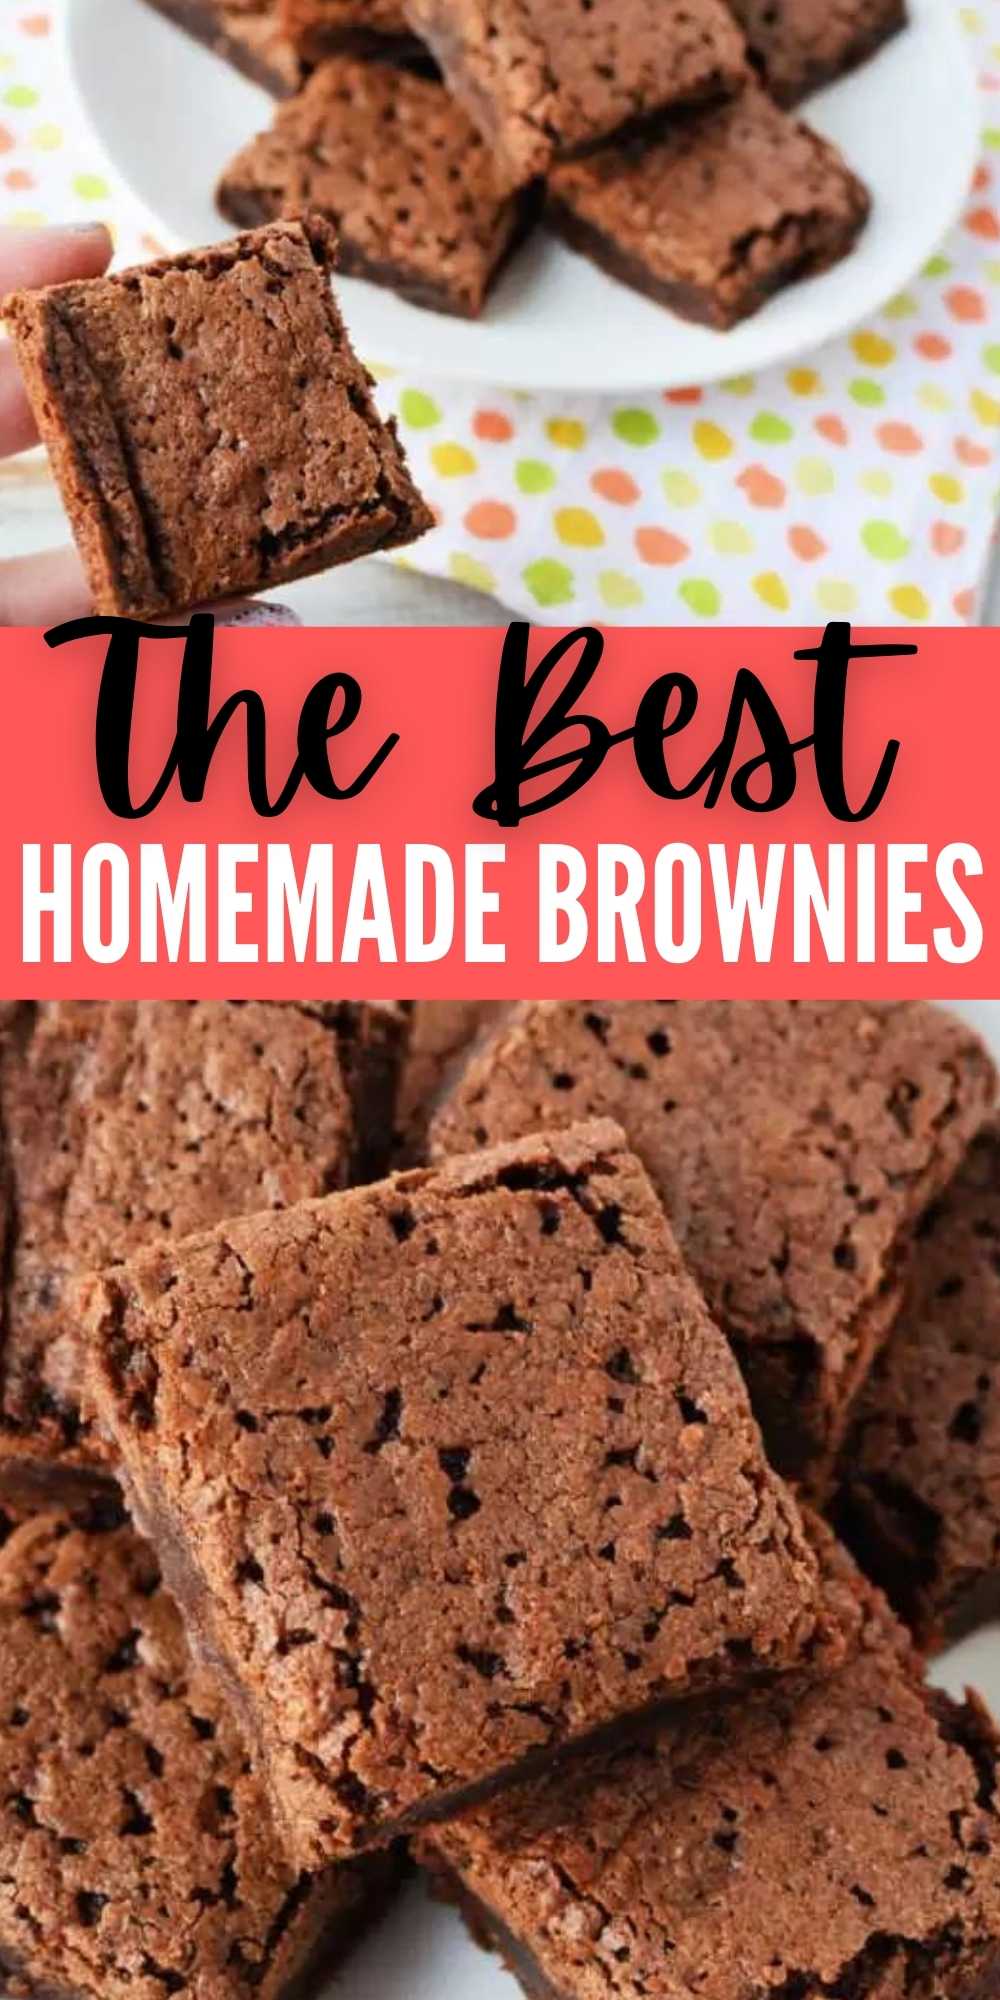 Learn how to make Homemade Brownies from scratch for a quick dessert any day of the week. This fudgy brownie recipe is so yummy and budget friendly. These homemade brownies are delicious and easy to make too with cocoa powder!  #eatingonadime #dessertrecipes #brownies #chocolate 
